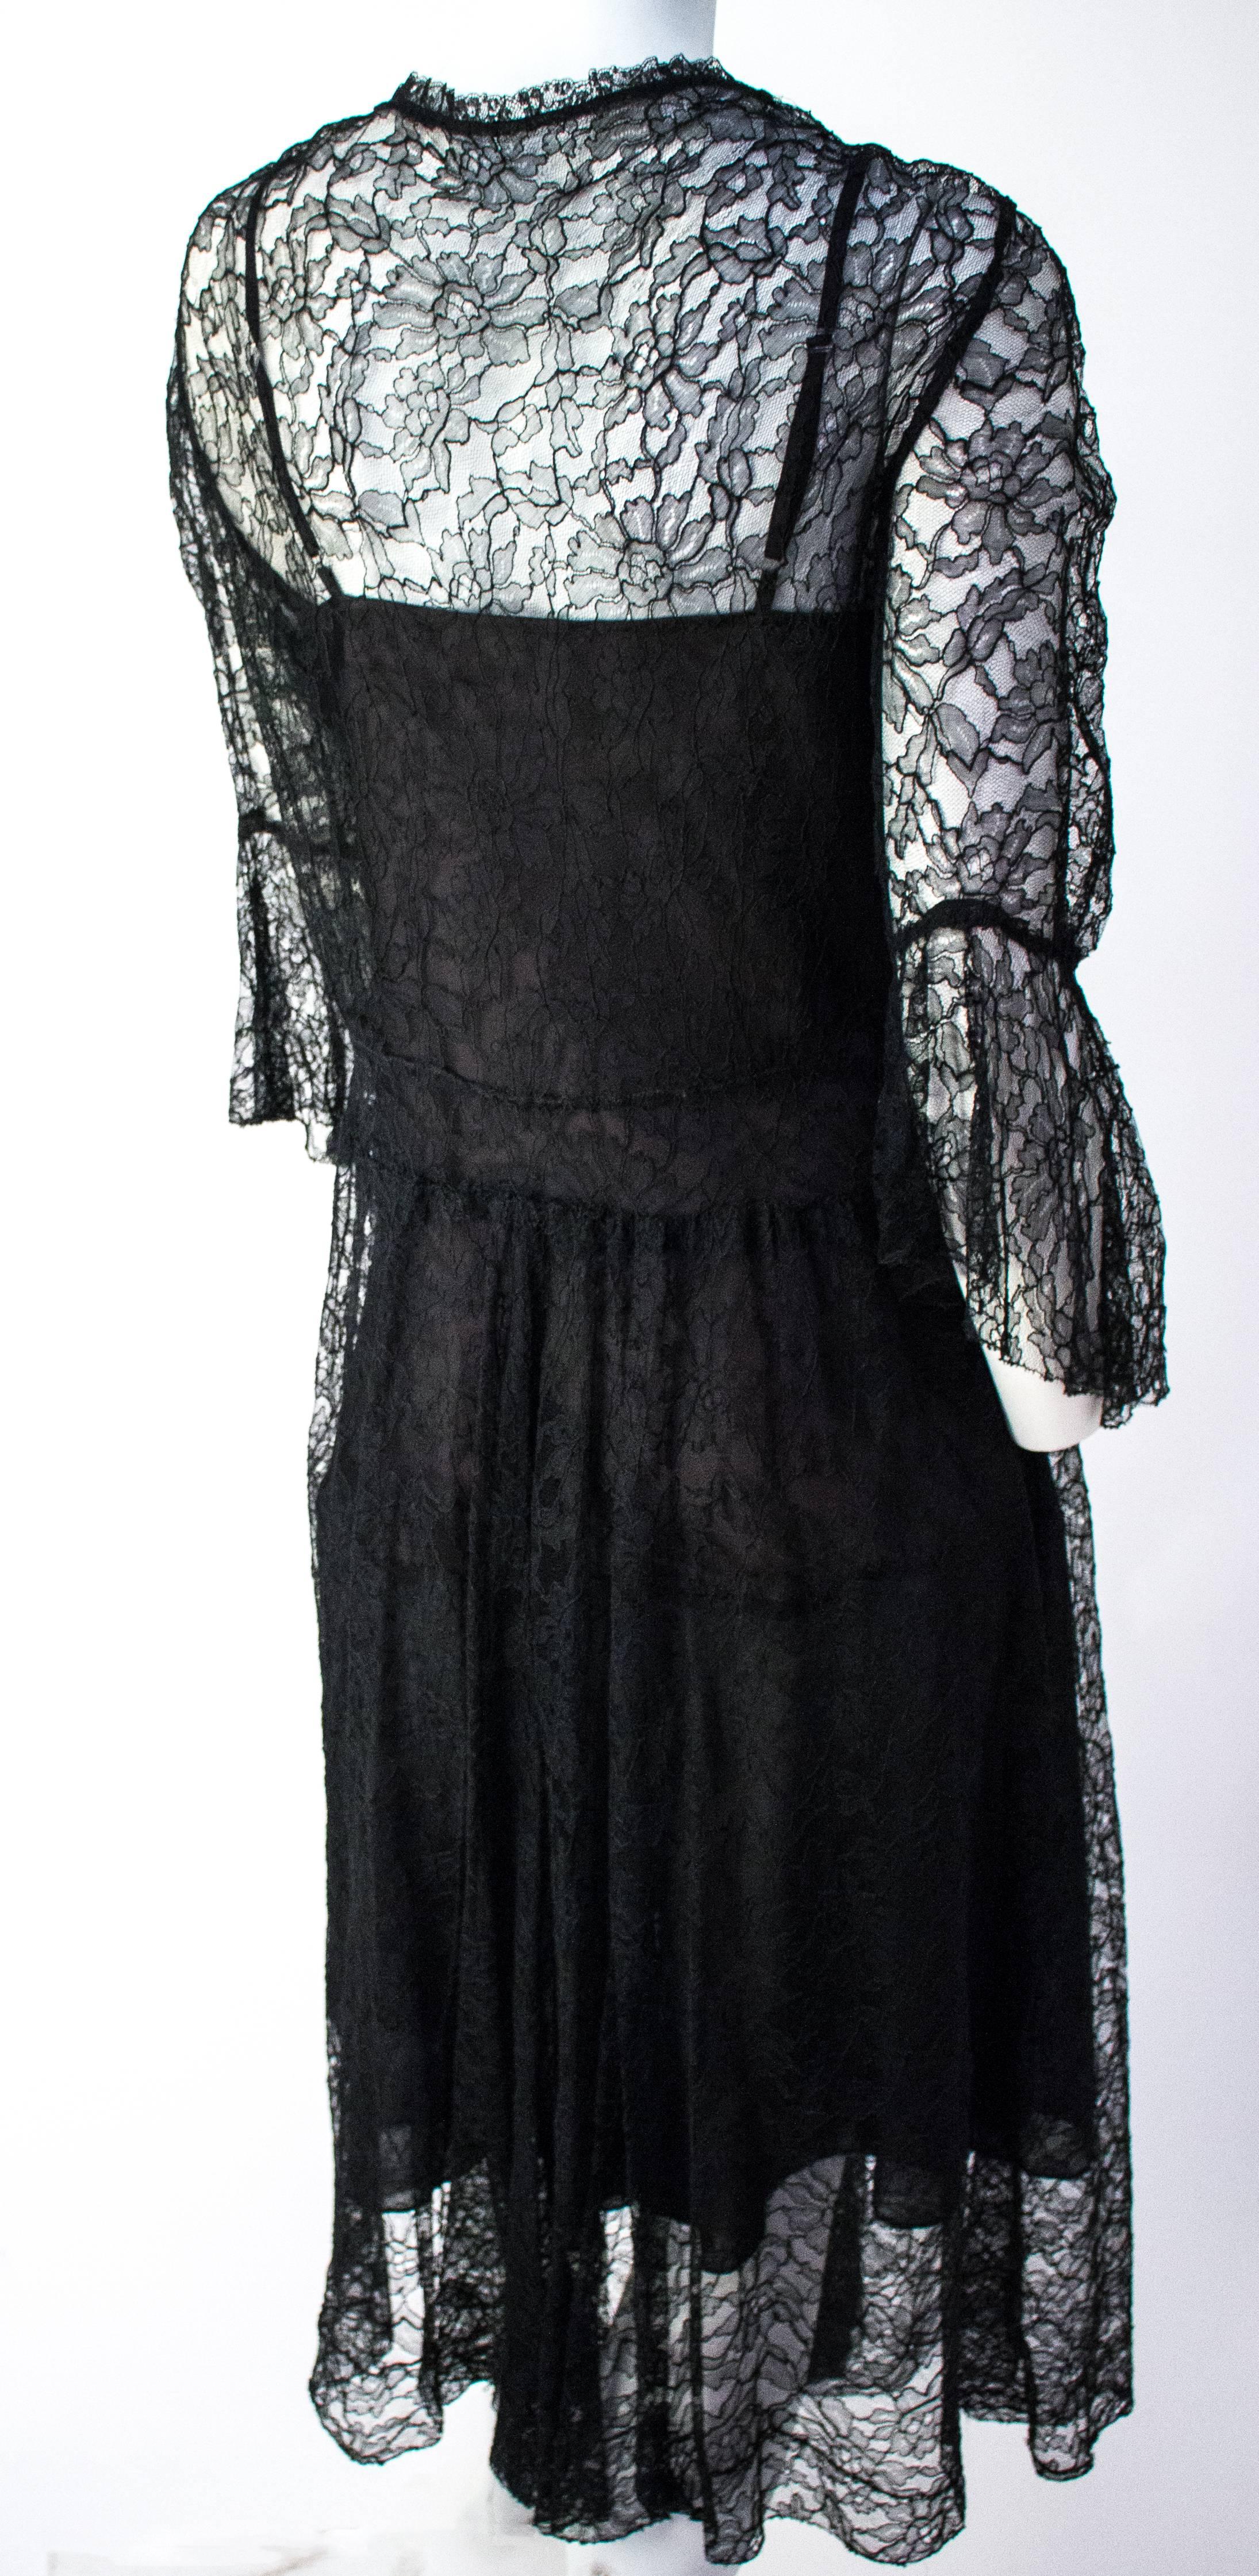 70s Black Lace Dress and Slip. No closures.